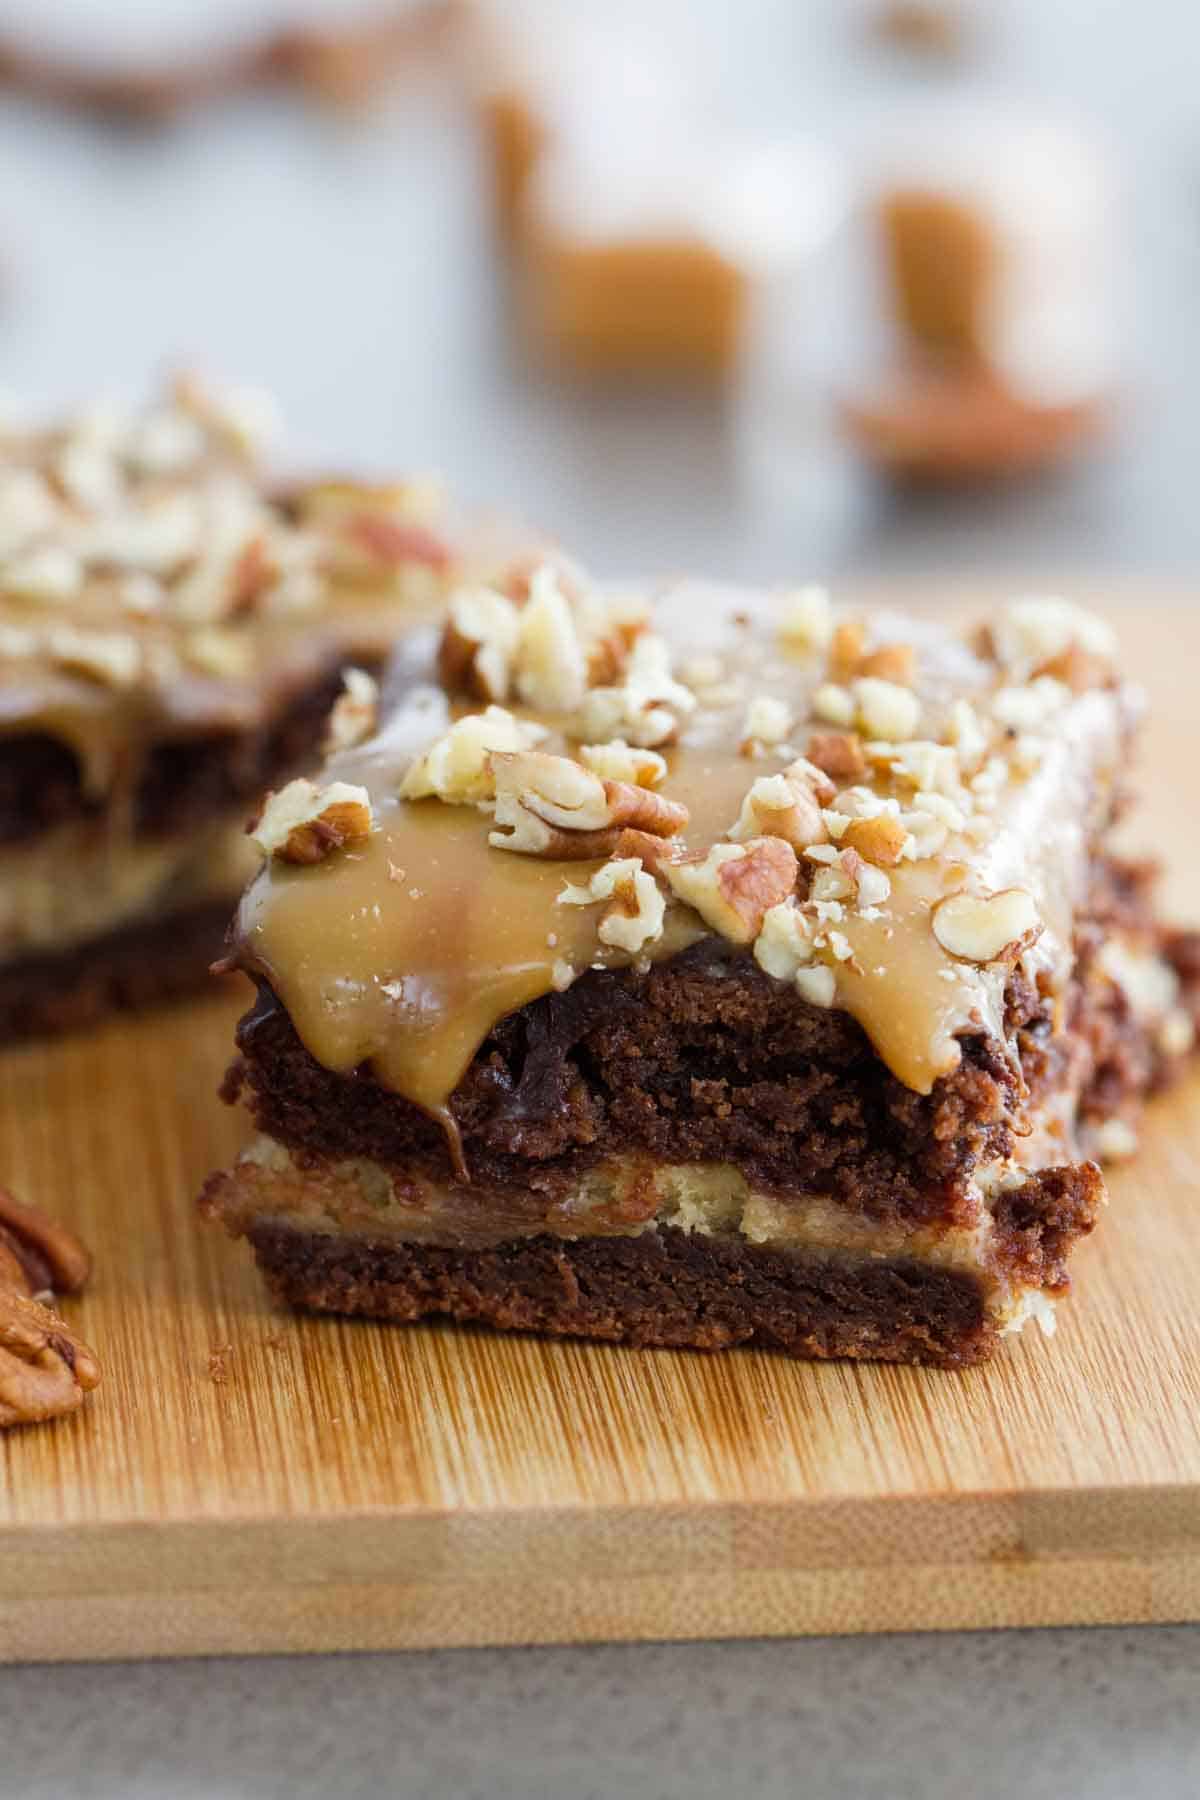 Forget the fancy bakery - these Turtle Cheesecake Cookie Bars are an impressive dessert you can make at home! A chocolate cookie base, a caramel cheesecake center, and lots of chocolate, caramel and pecans to top them off!